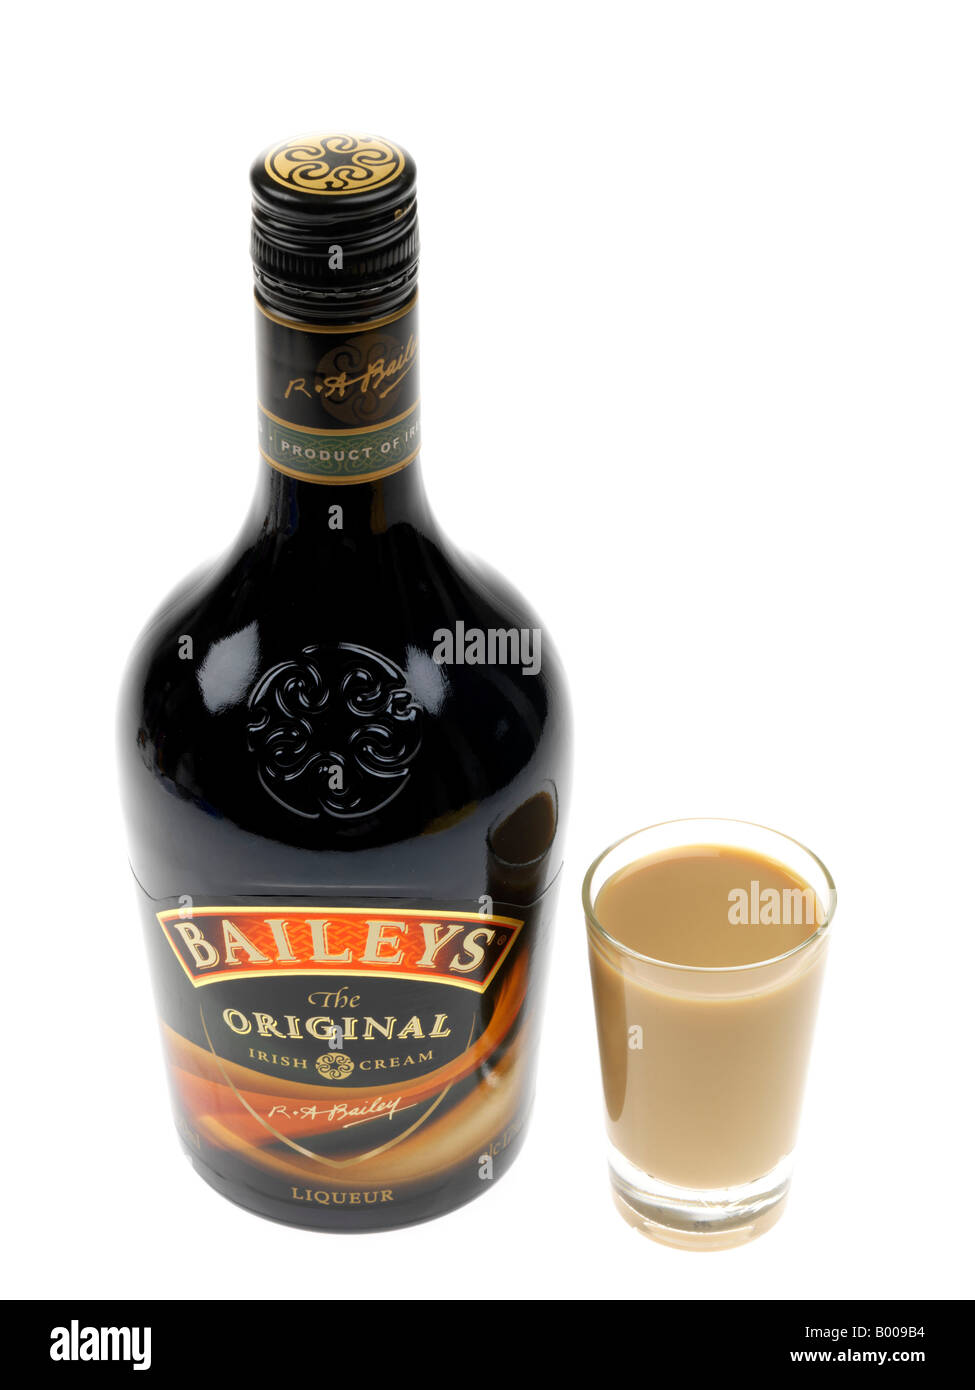 Bottle Of Baileys Original Irish Cream Liqueur Isolated Against A White Background With A Clipping Path And No People In Manufacturers Branding Stock Photo